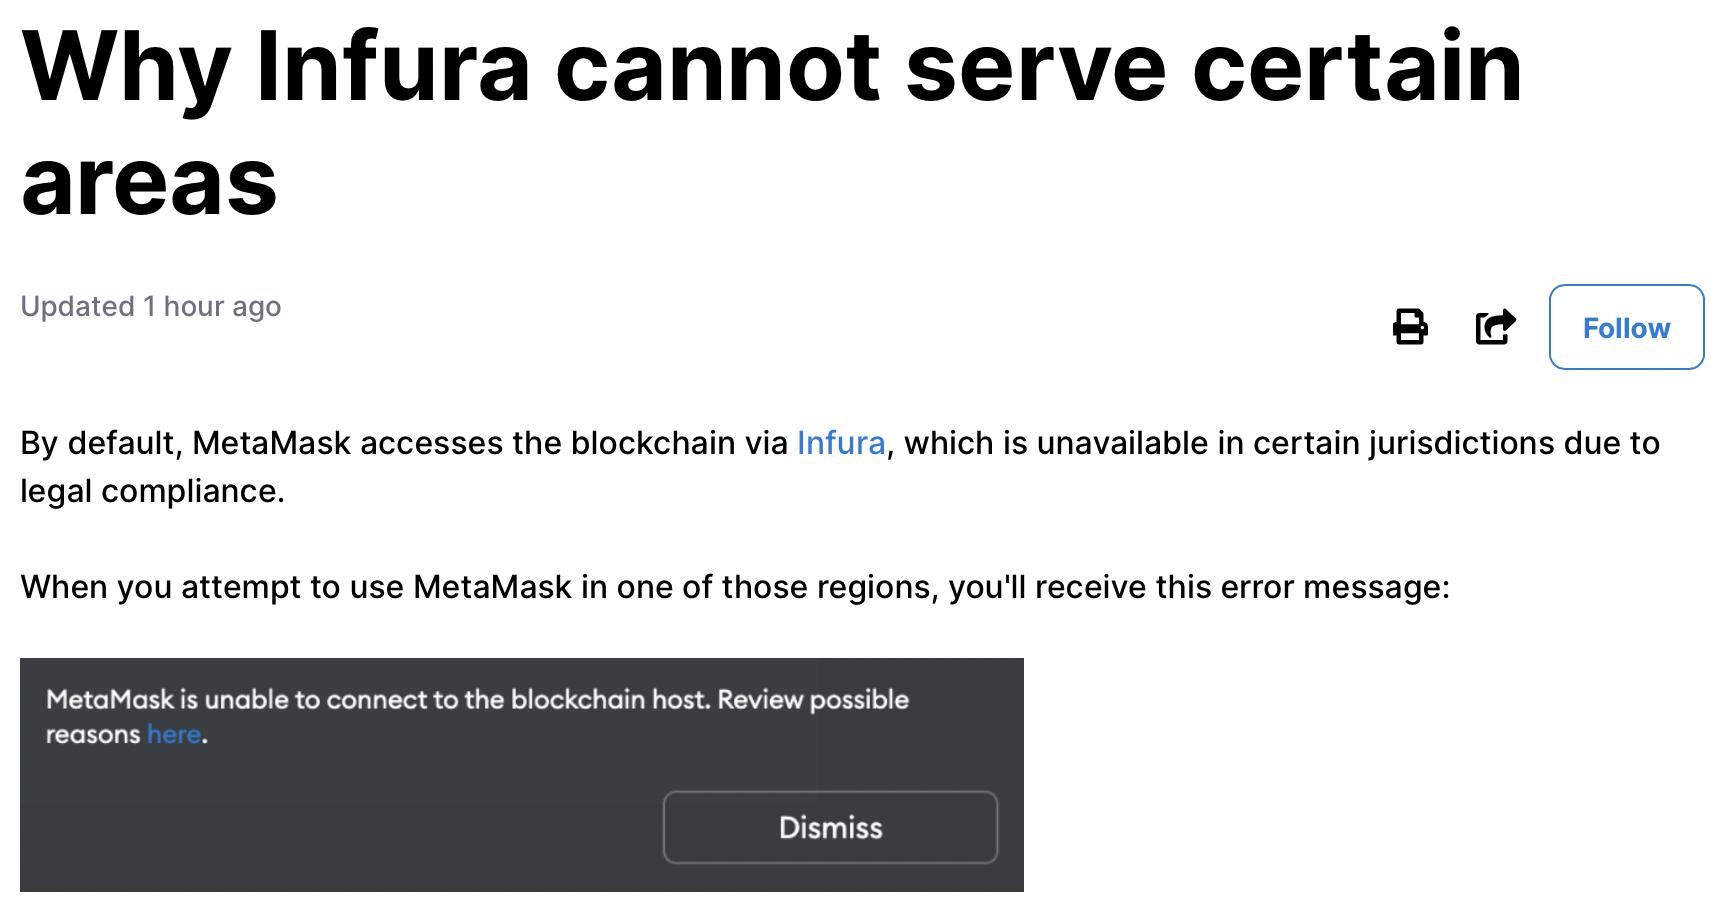 MetaMask acknowledging that users in sanctioned countries such as Venezuela may not be able to access services.